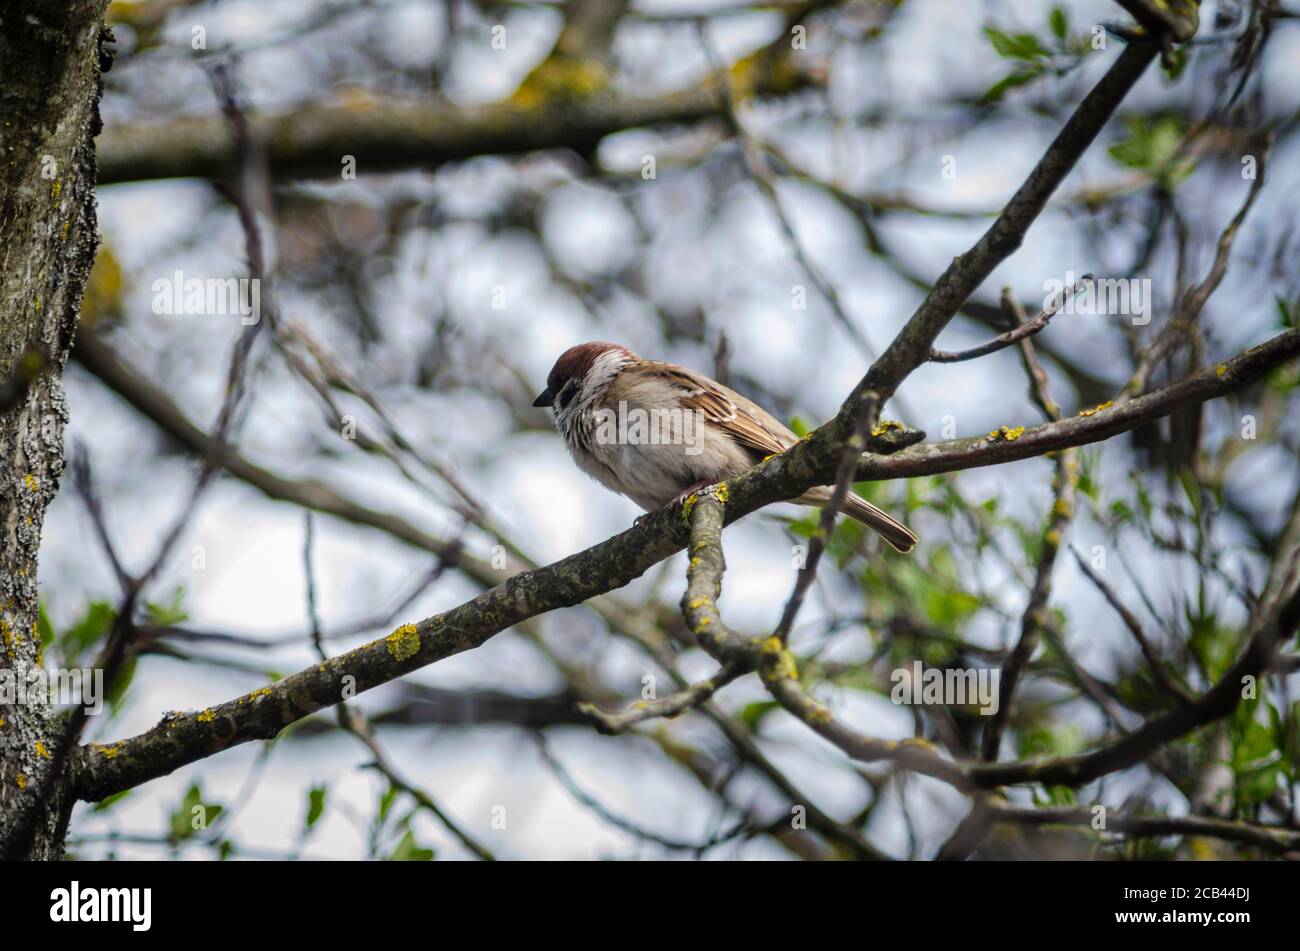 Sparrow on a branch of an Apple tree Stock Photo